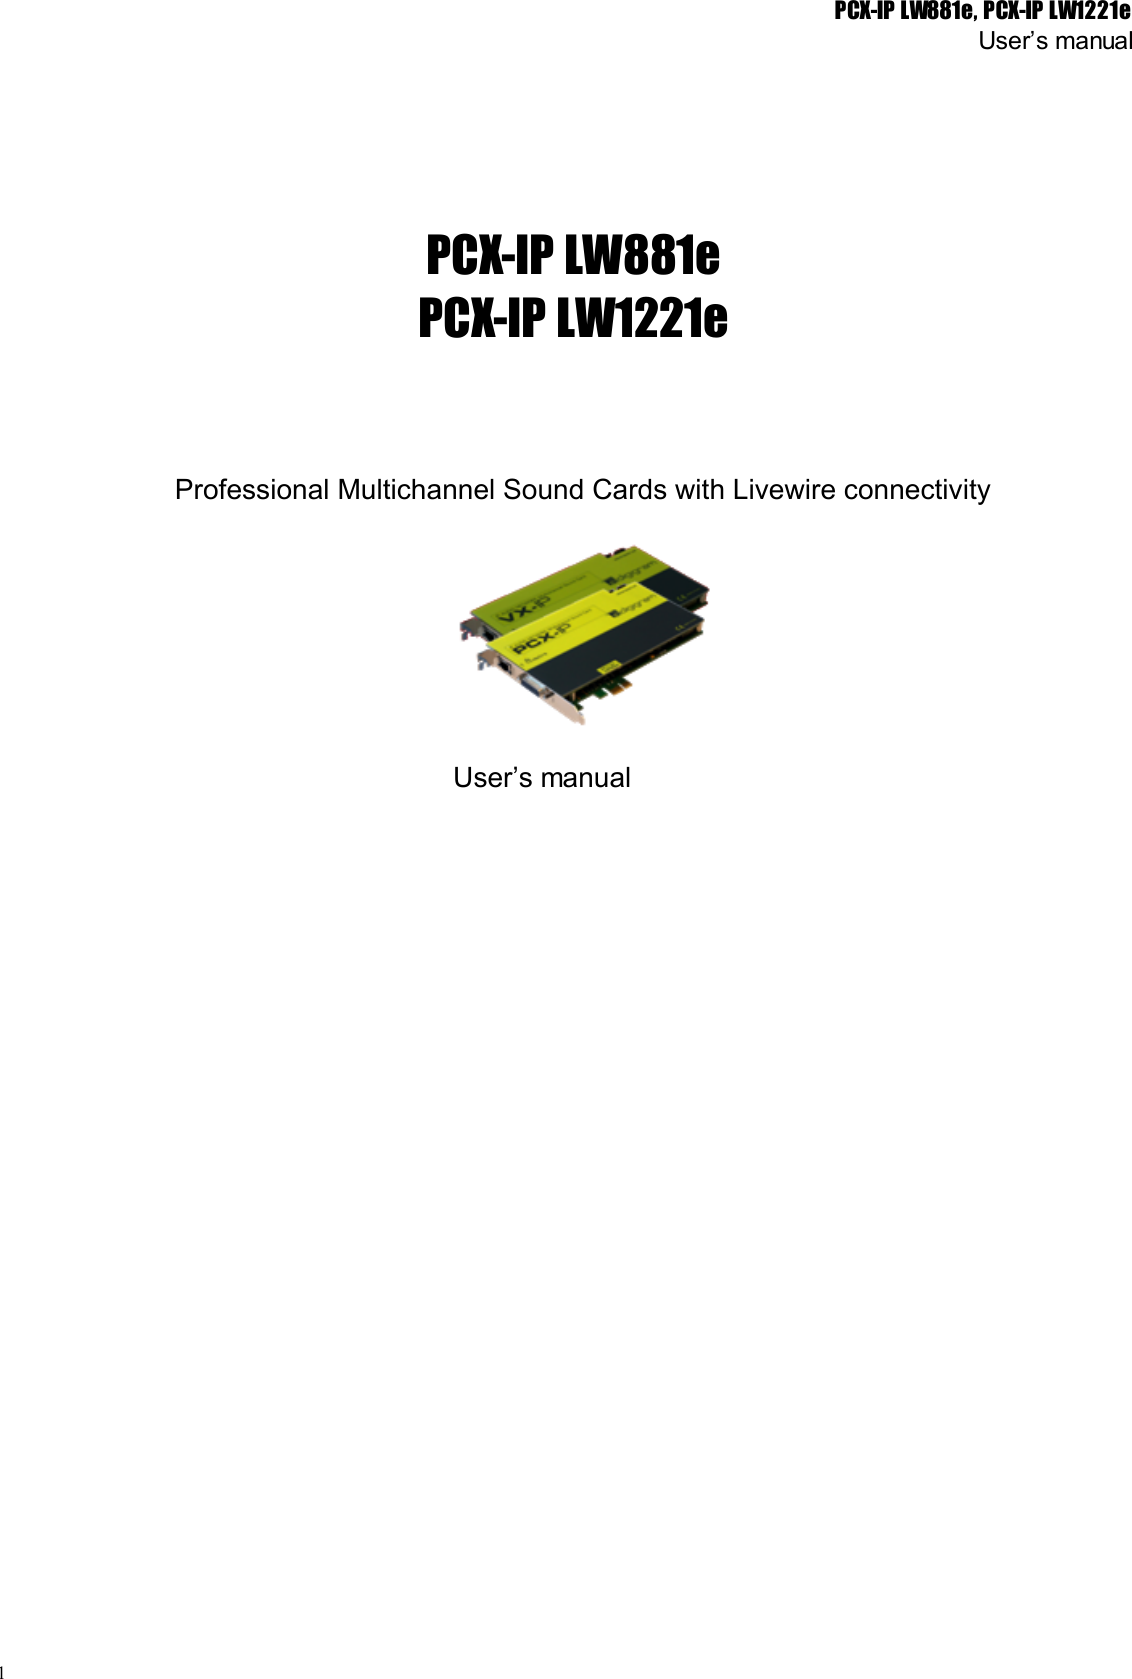 PCX-IP LW881e, PCX-IP LW1221eUser’s manualPCX-IP LW881ePCX-IP LW1221eProfessional Multichannel Sound Cards with Livewire connectivity  User’s manual1